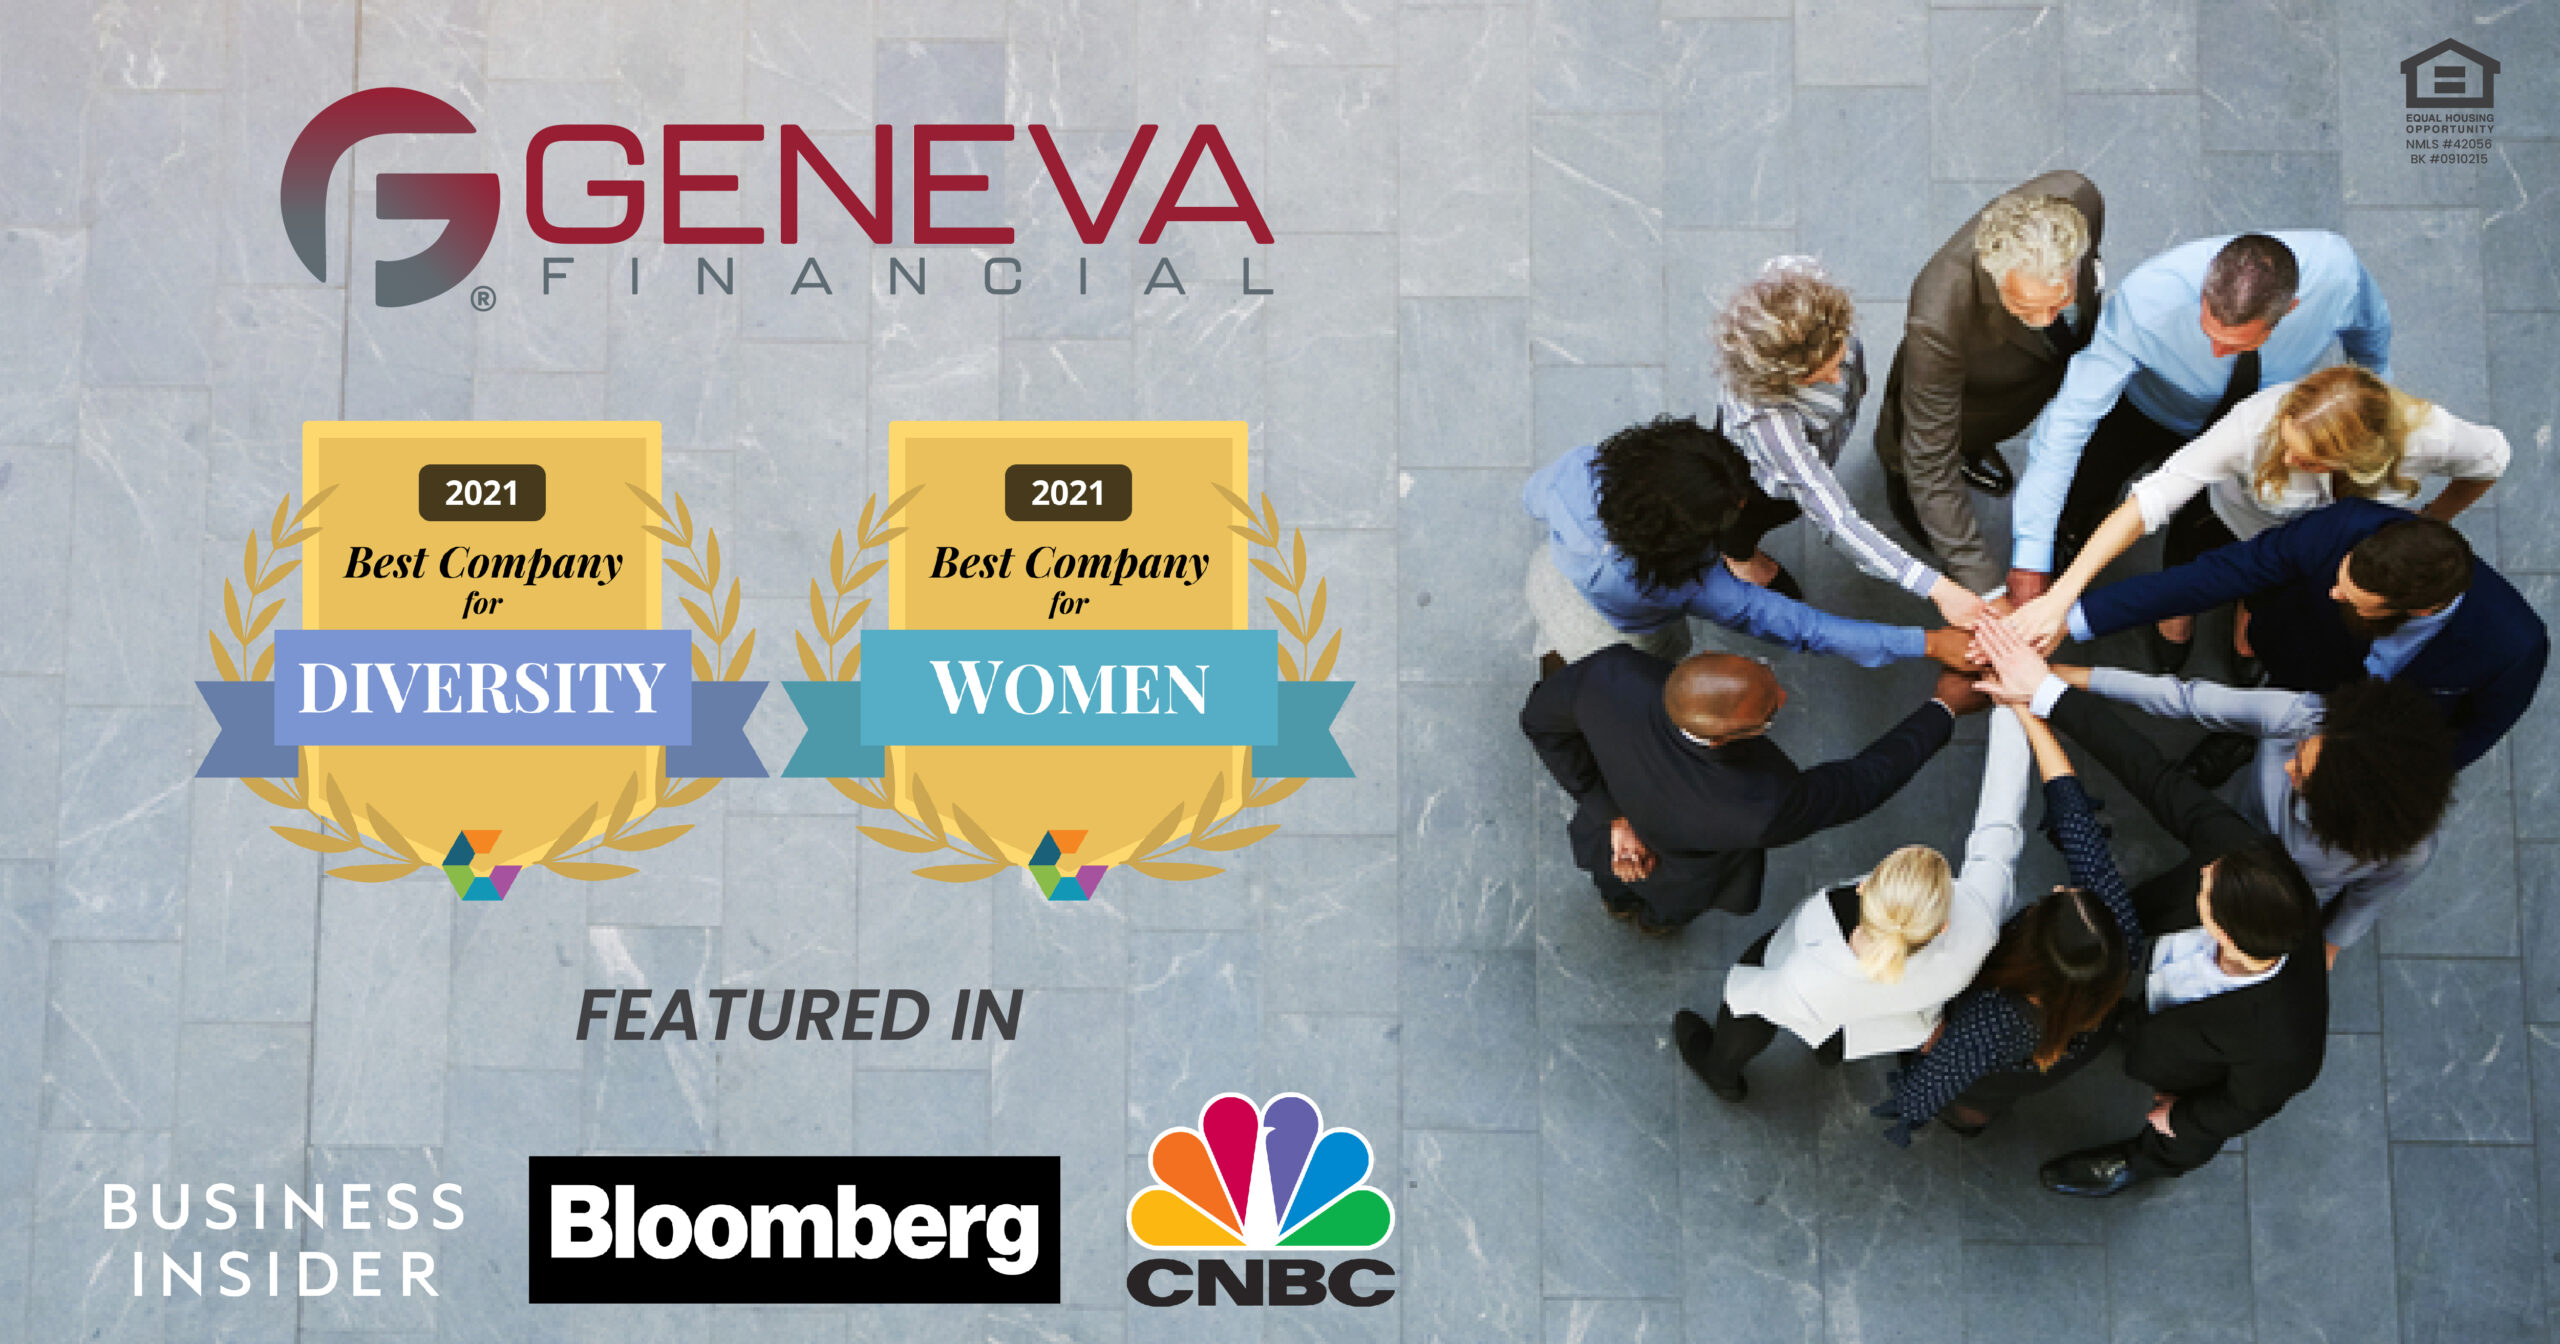 Geneva Financial Ranked in Top 100 Best Companies for Women and Diversity in America 2021 List as published in Business Insider Magazine.